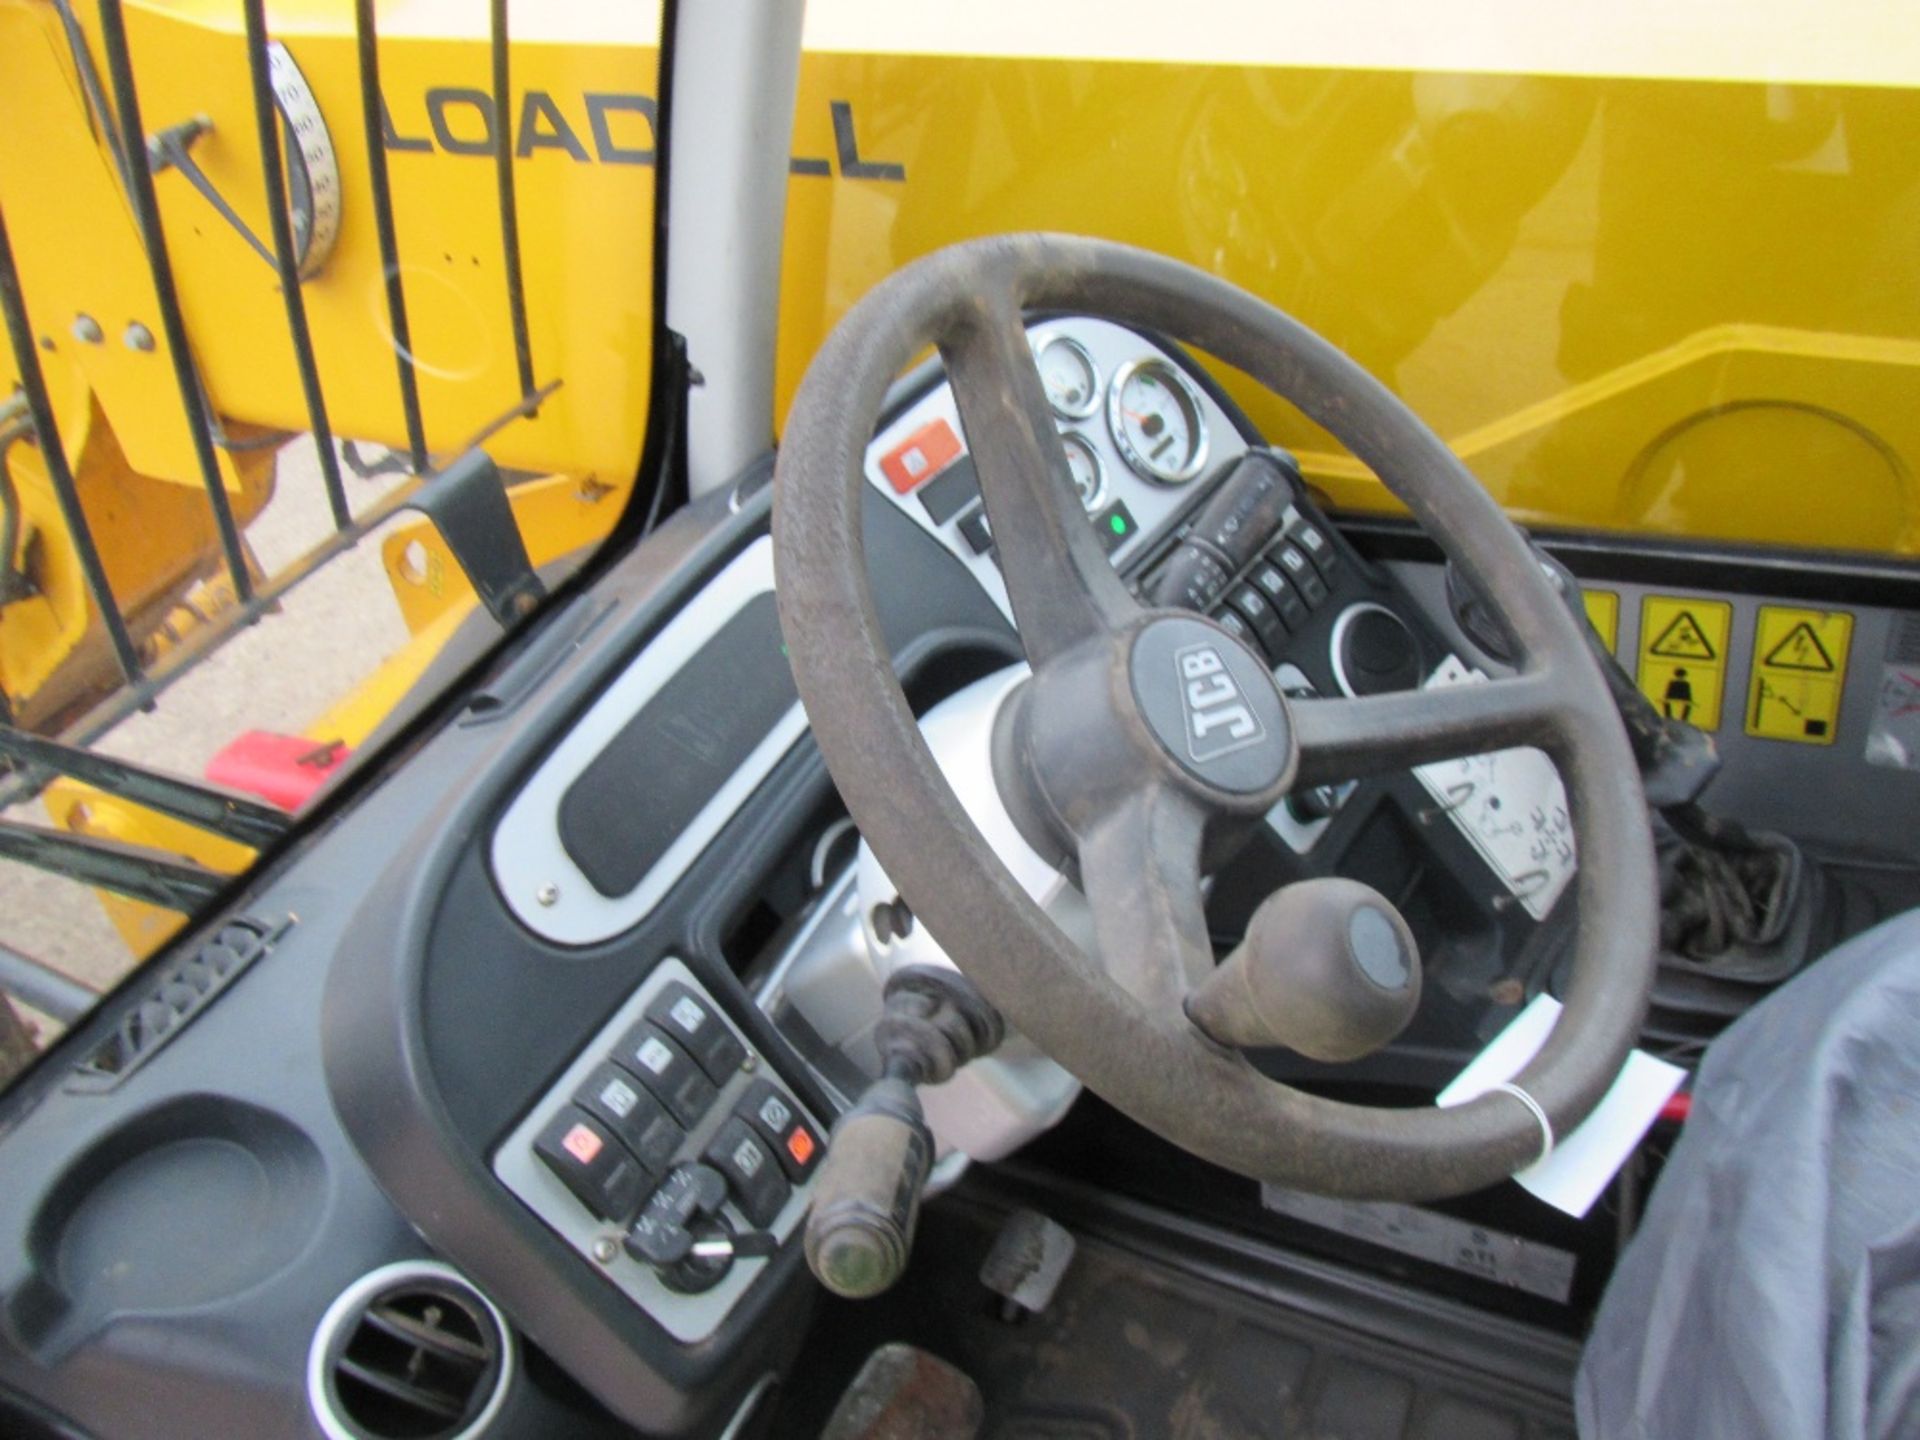 2006 JCB 541-70 Telehandler with Pick Up Hitch & Pallet Tines - Image 7 of 8